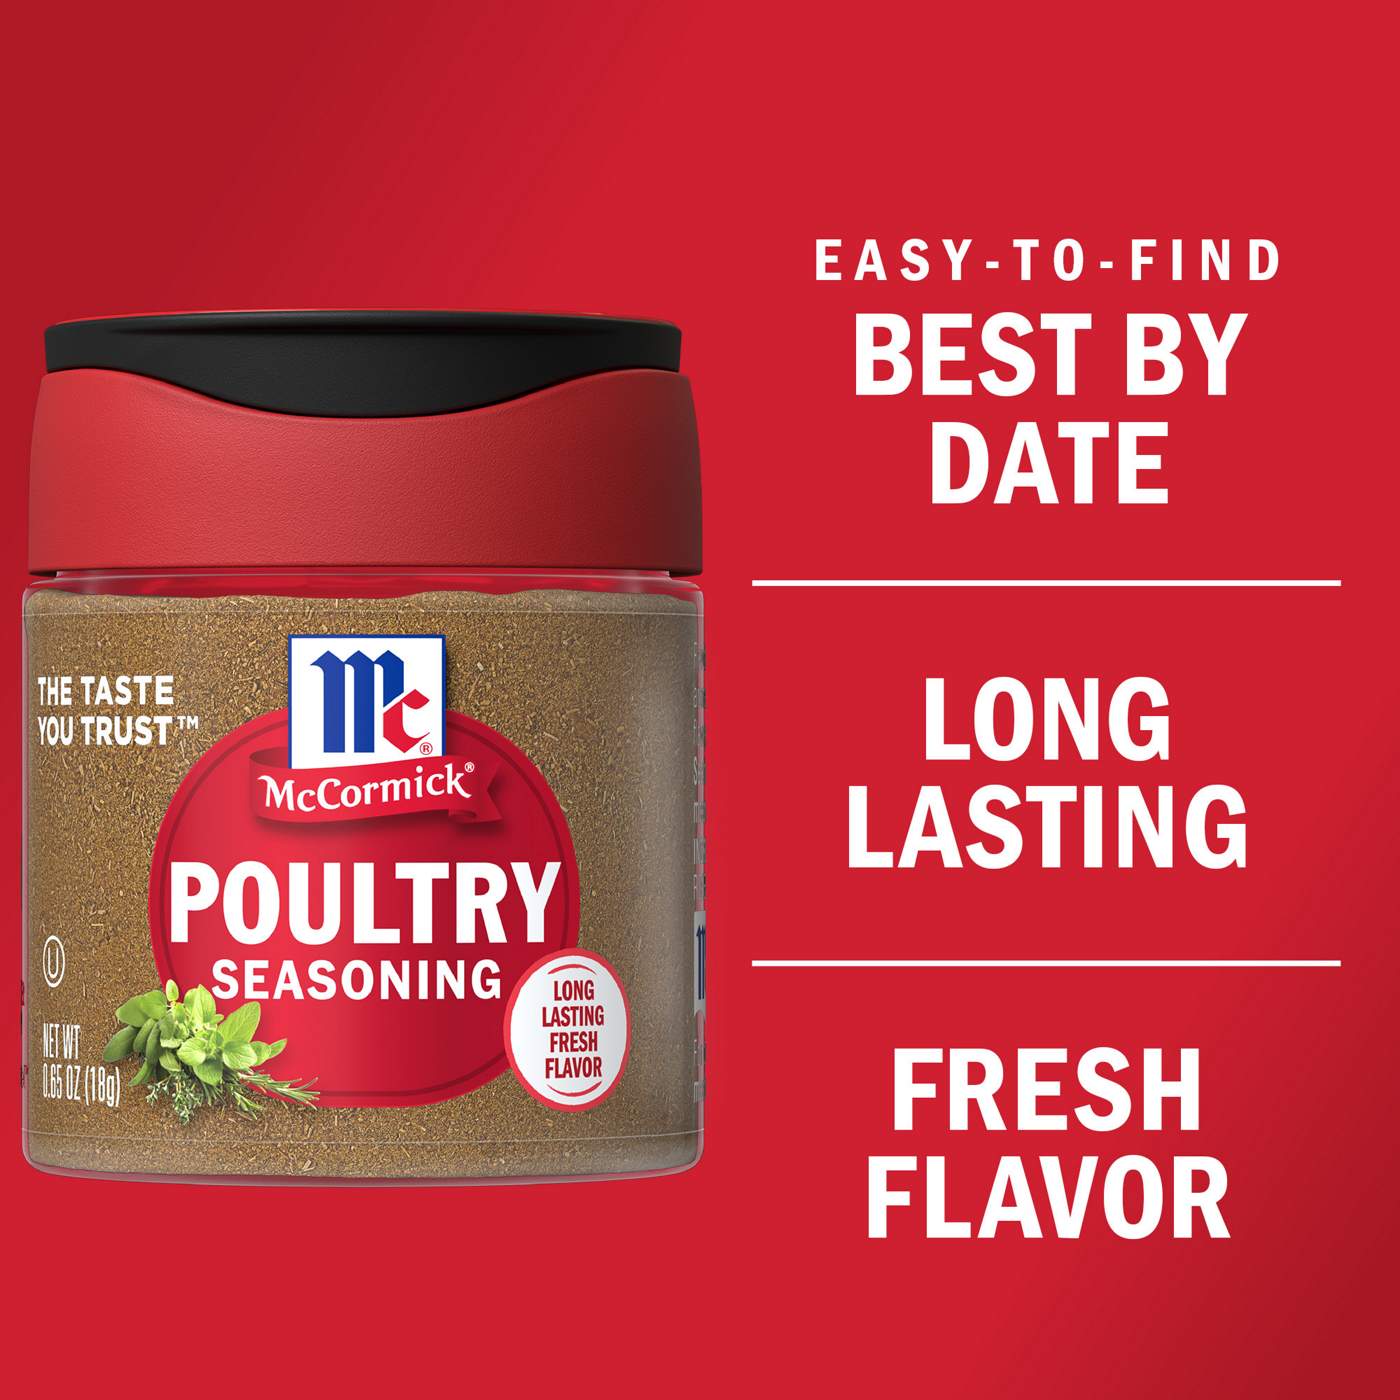 McCormick Poultry Seasoning; image 2 of 8